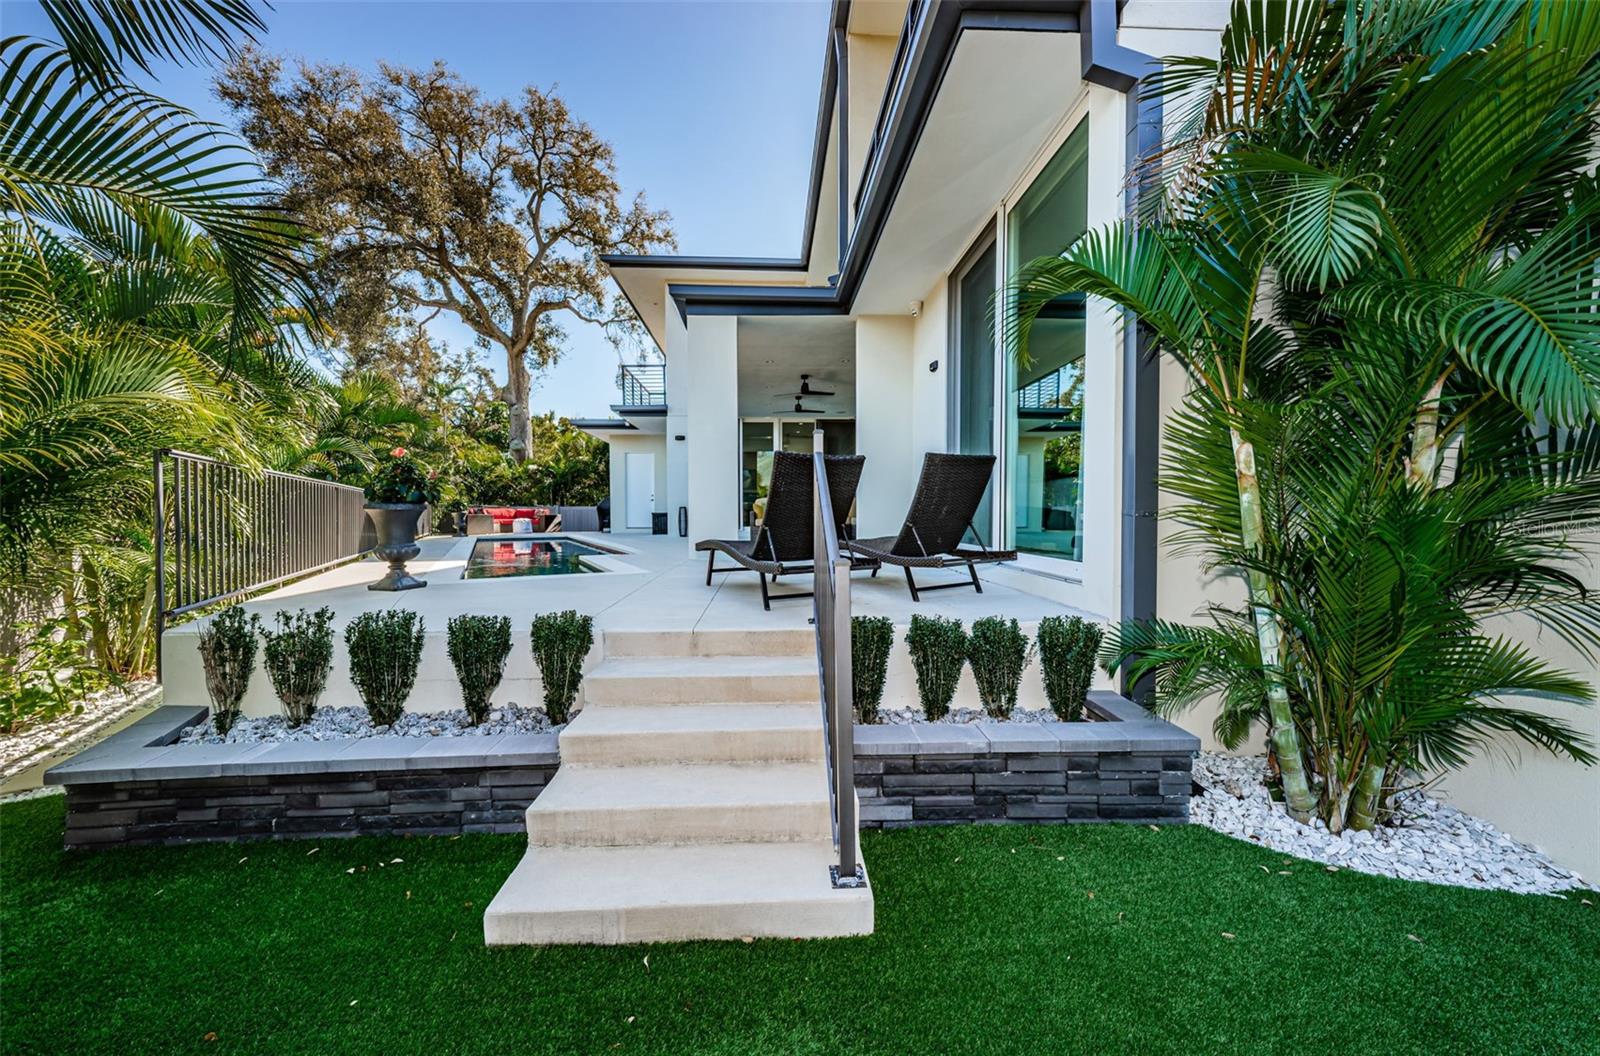 Backyard oasis has been created with lush landscaping, up-lighting, artificial turf on one side and completely private.